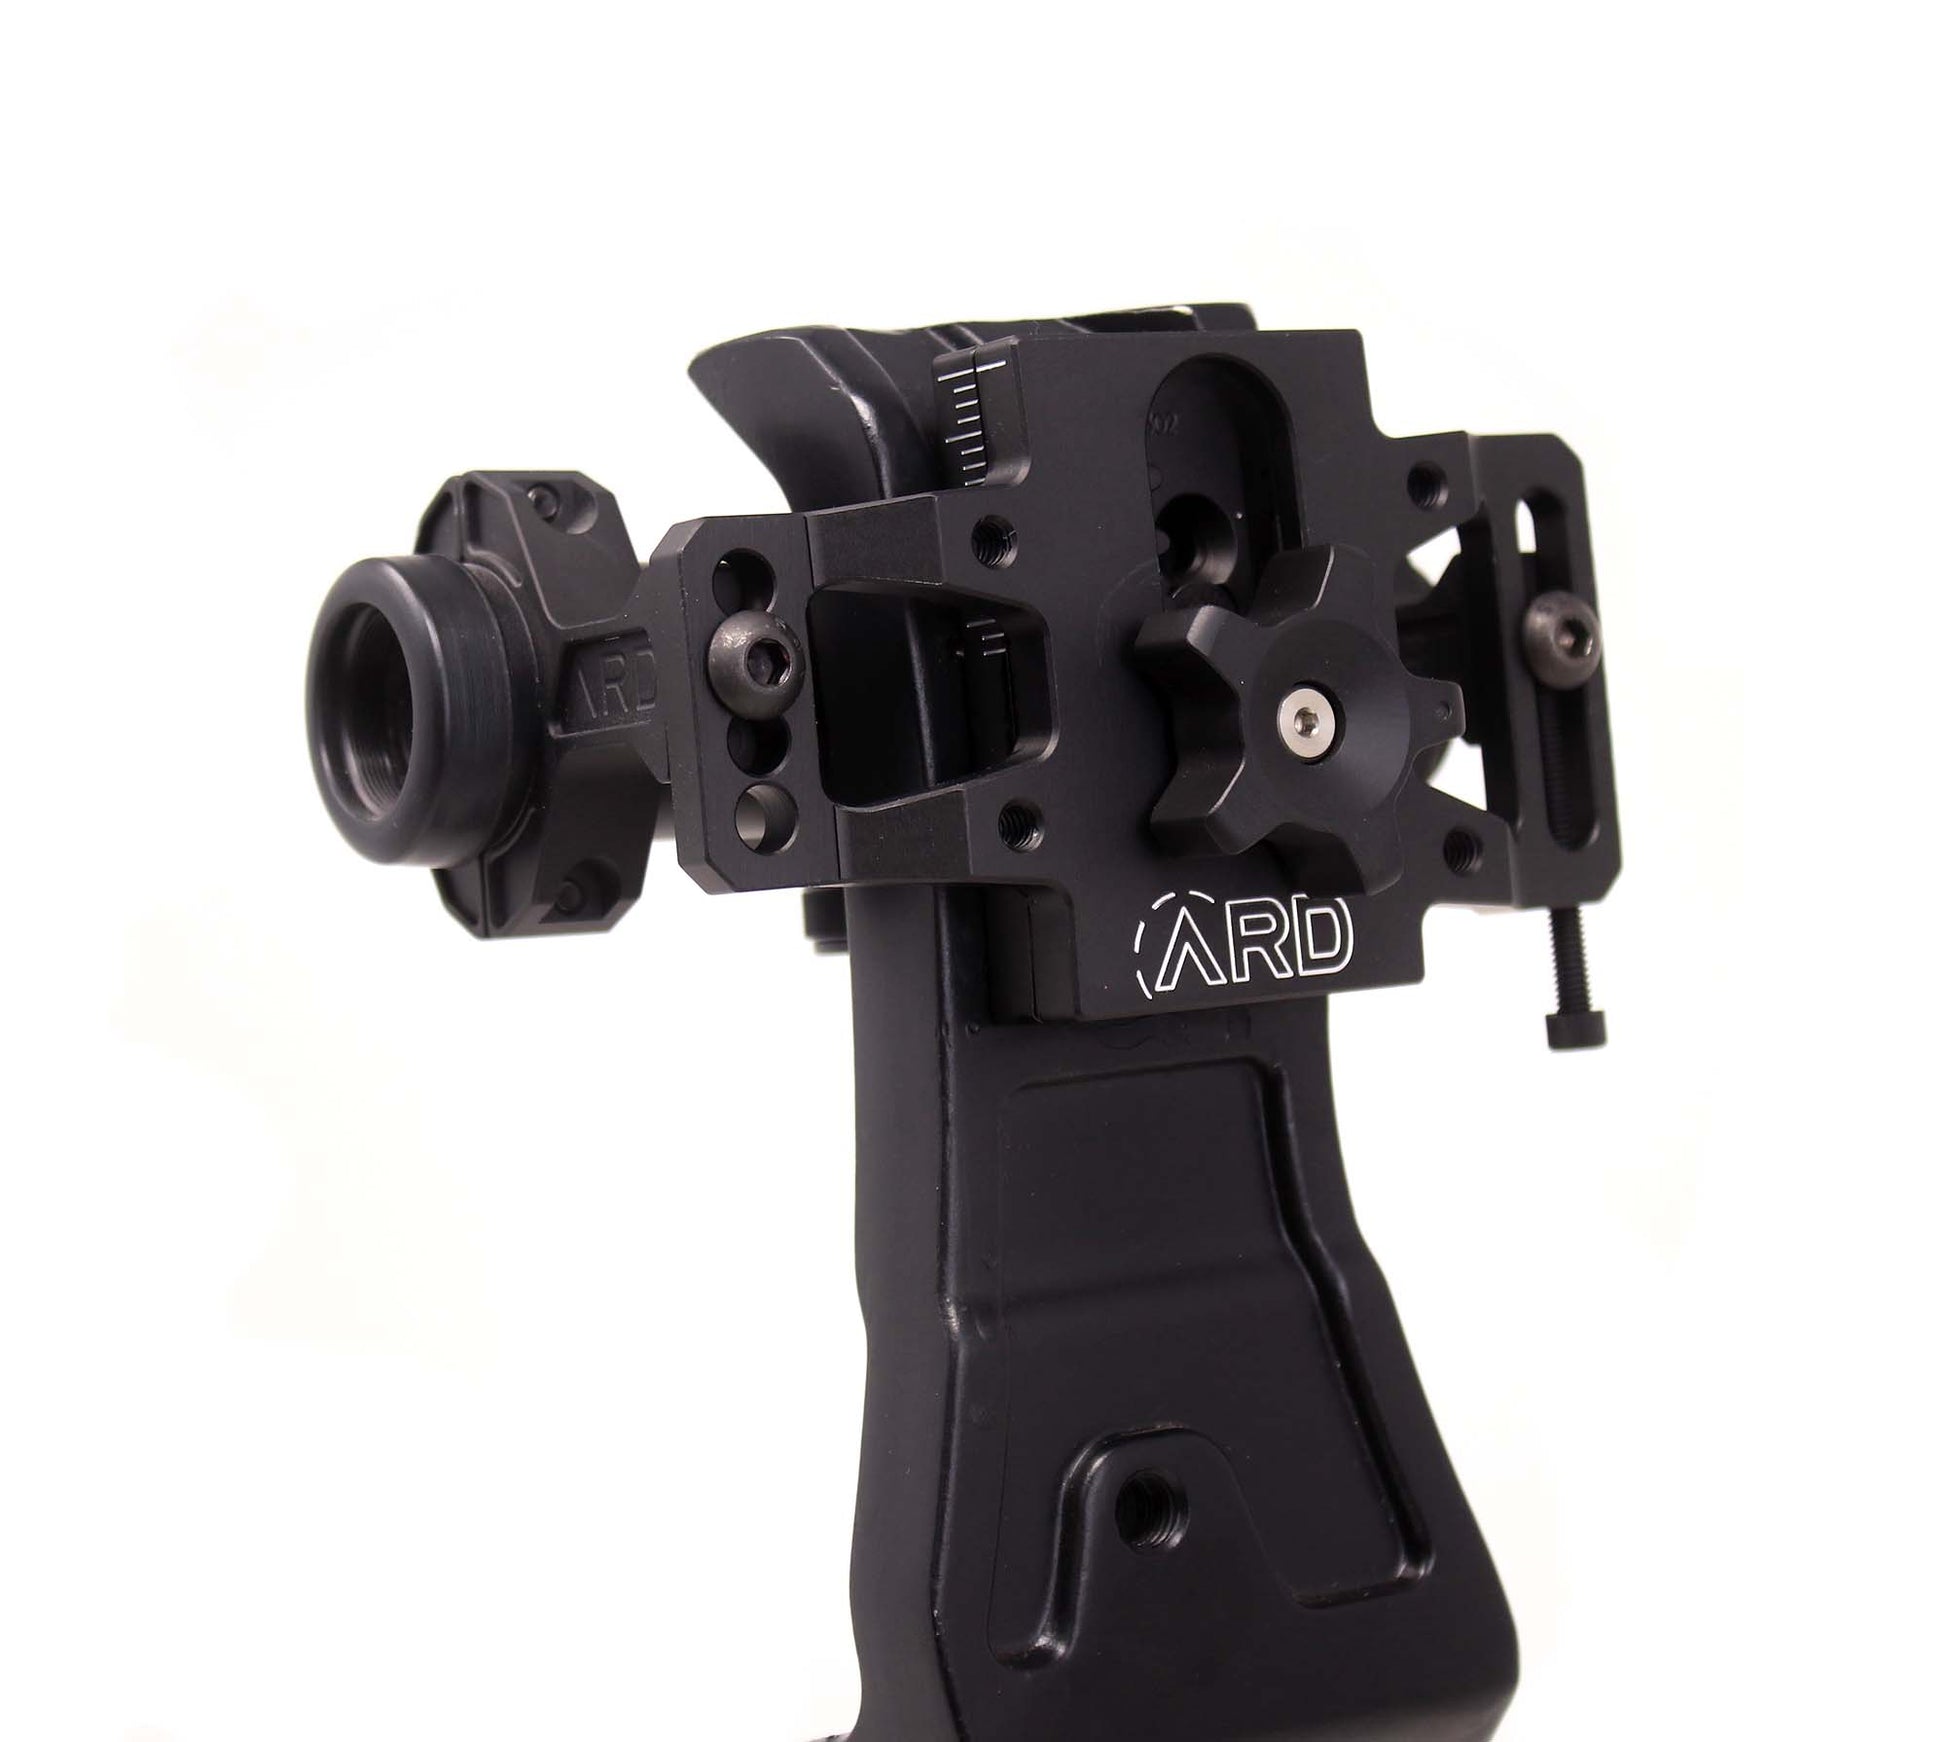 Adjustable mount for a compound bow. ARD elite package